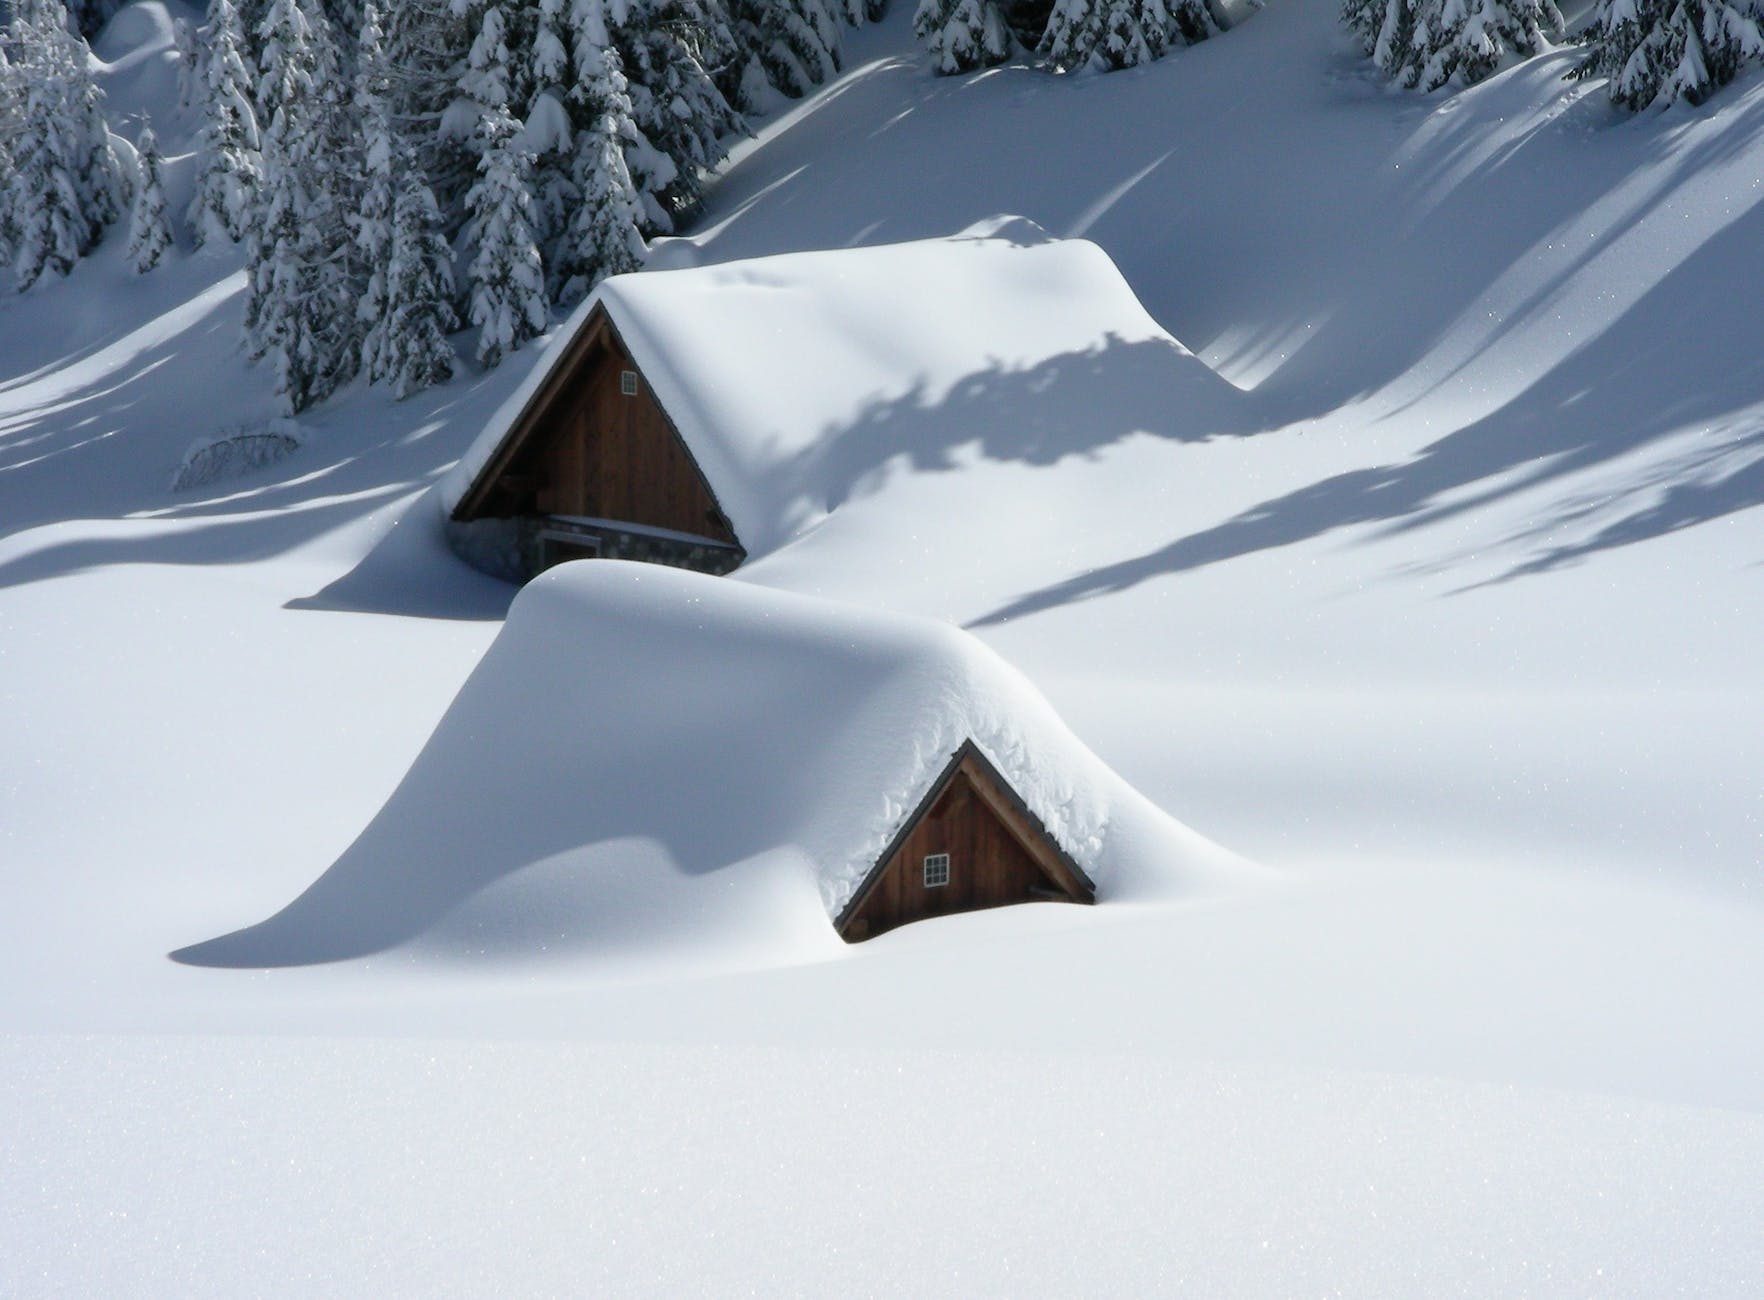 brown wooden house covered with snow near pine trees, View of portfolio income in early retirement